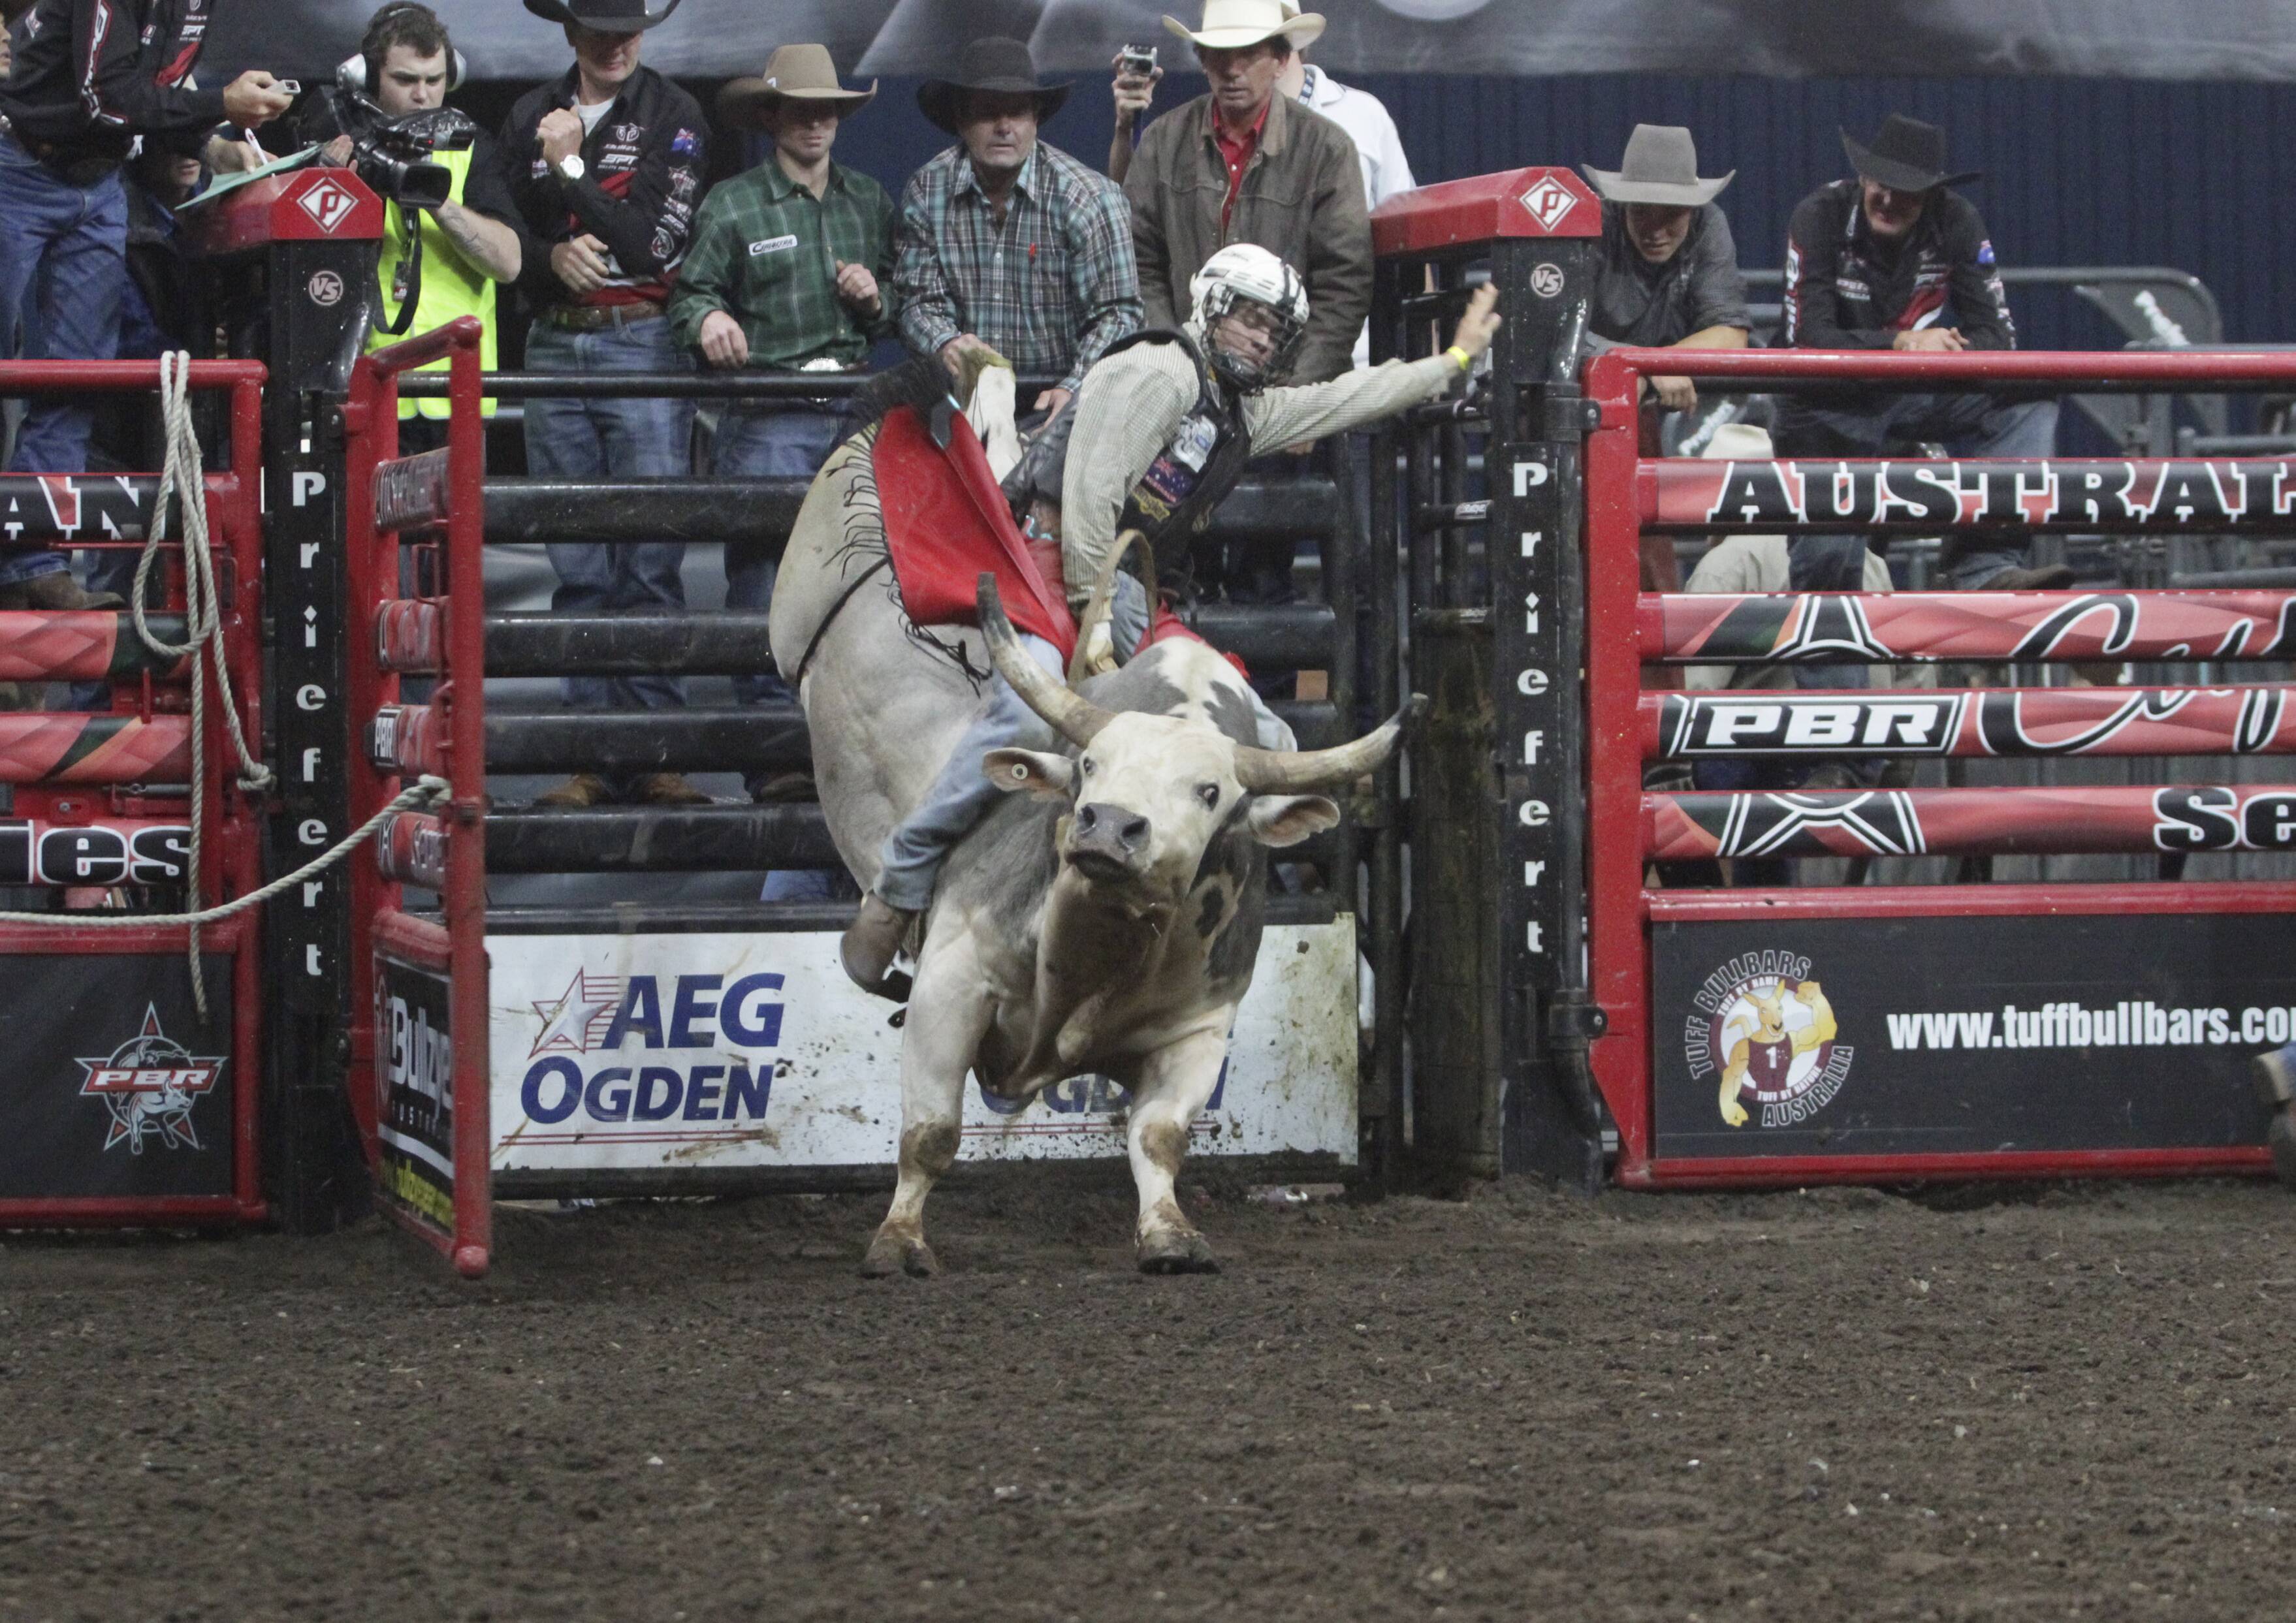 Hunter mans pro bull riding ups and downs Newcastle Herald Newcastle,